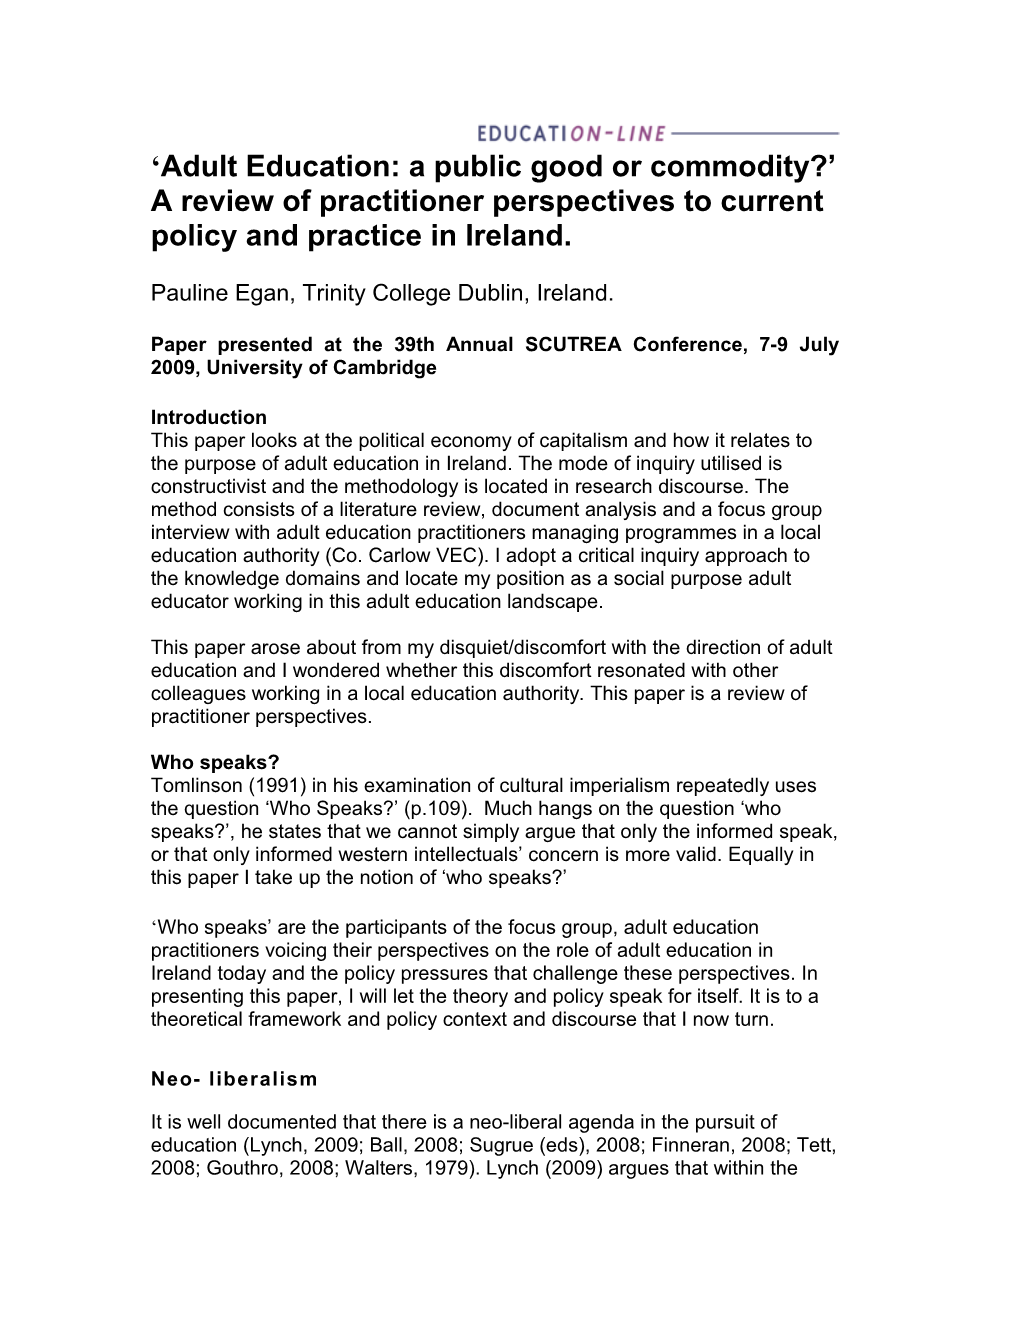 Adult Education: a Public Good Or Commodity? a Review of Practitioner Perspectives To